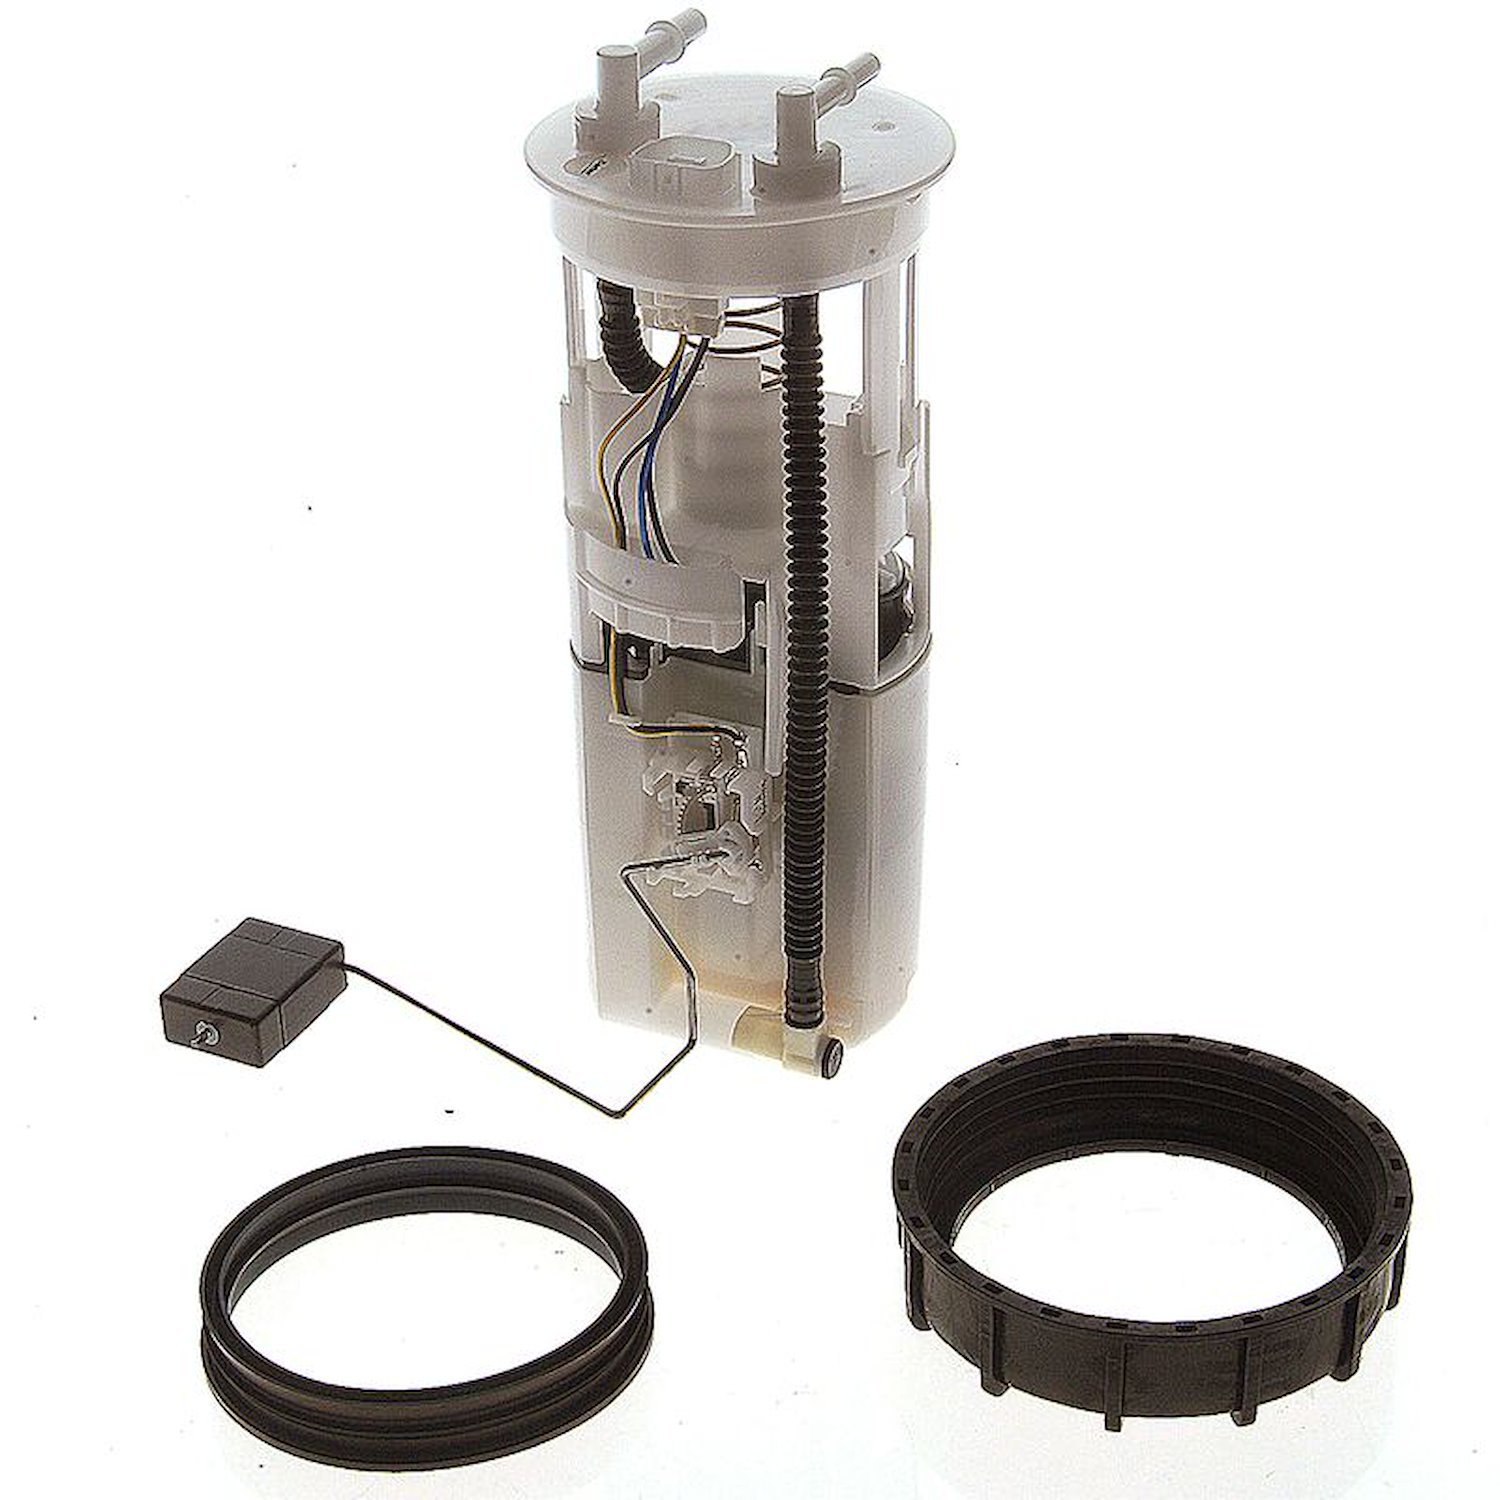 OE Replacement Fuel Pump Module Assembly for 2004-2005 Honda Insight